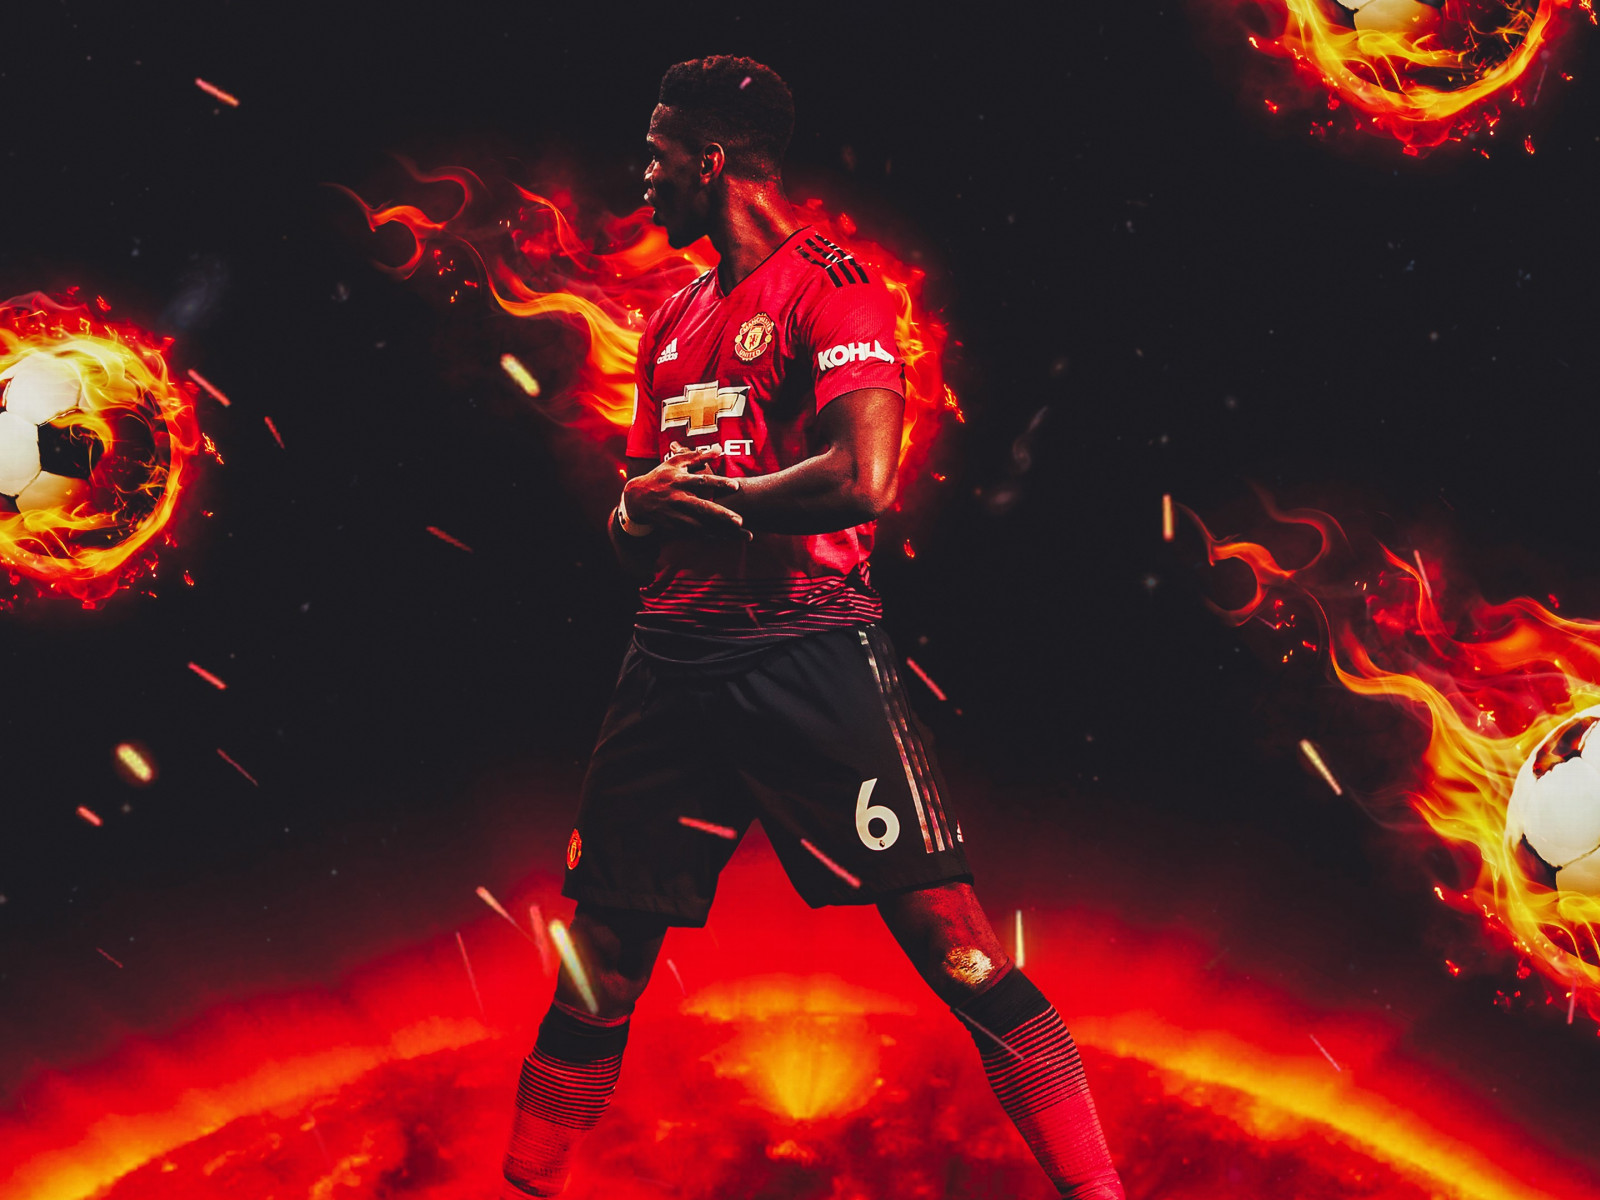 Paul Pogba for Manchester United wallpaper 1600x1200